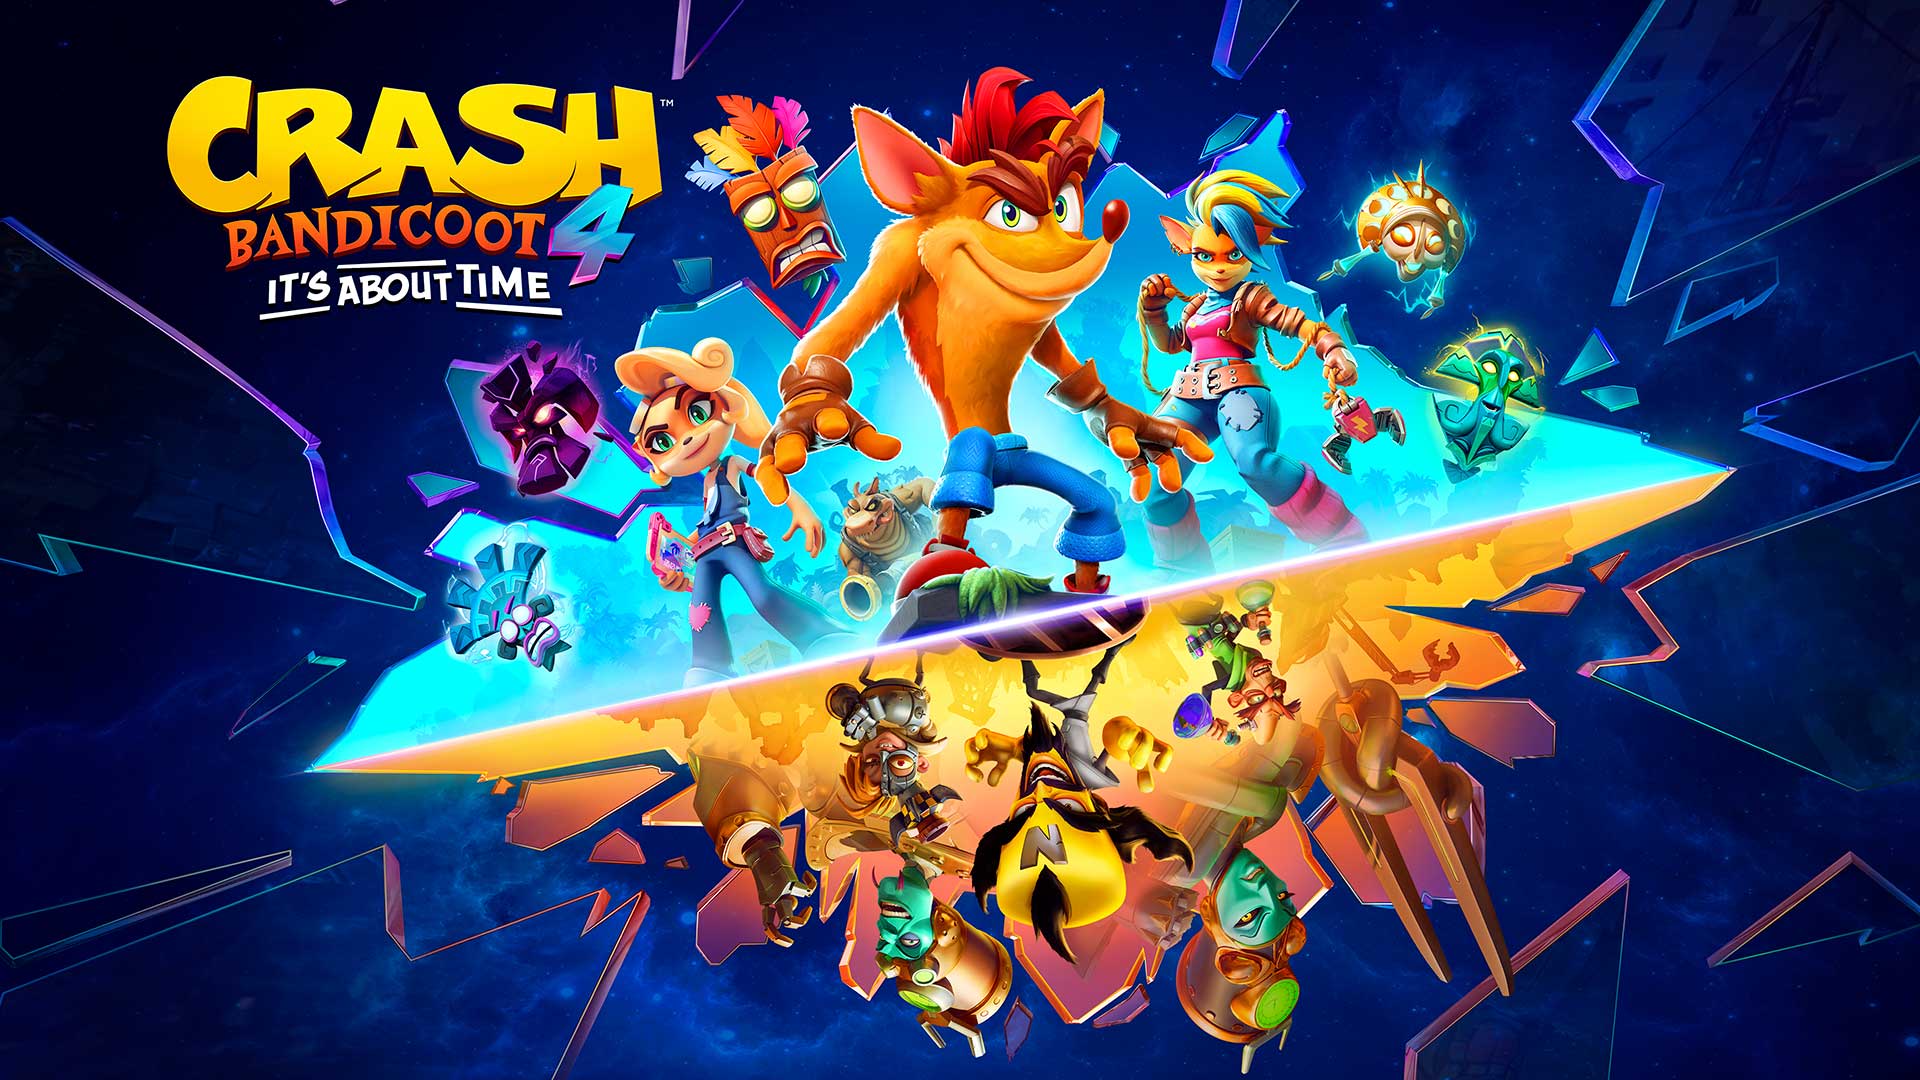 Crash Bandicoot™ It's About Time — Available Now on PlayStation 5, Xbox Series X|S, Nintendo Switch, Soon to Battle.net.